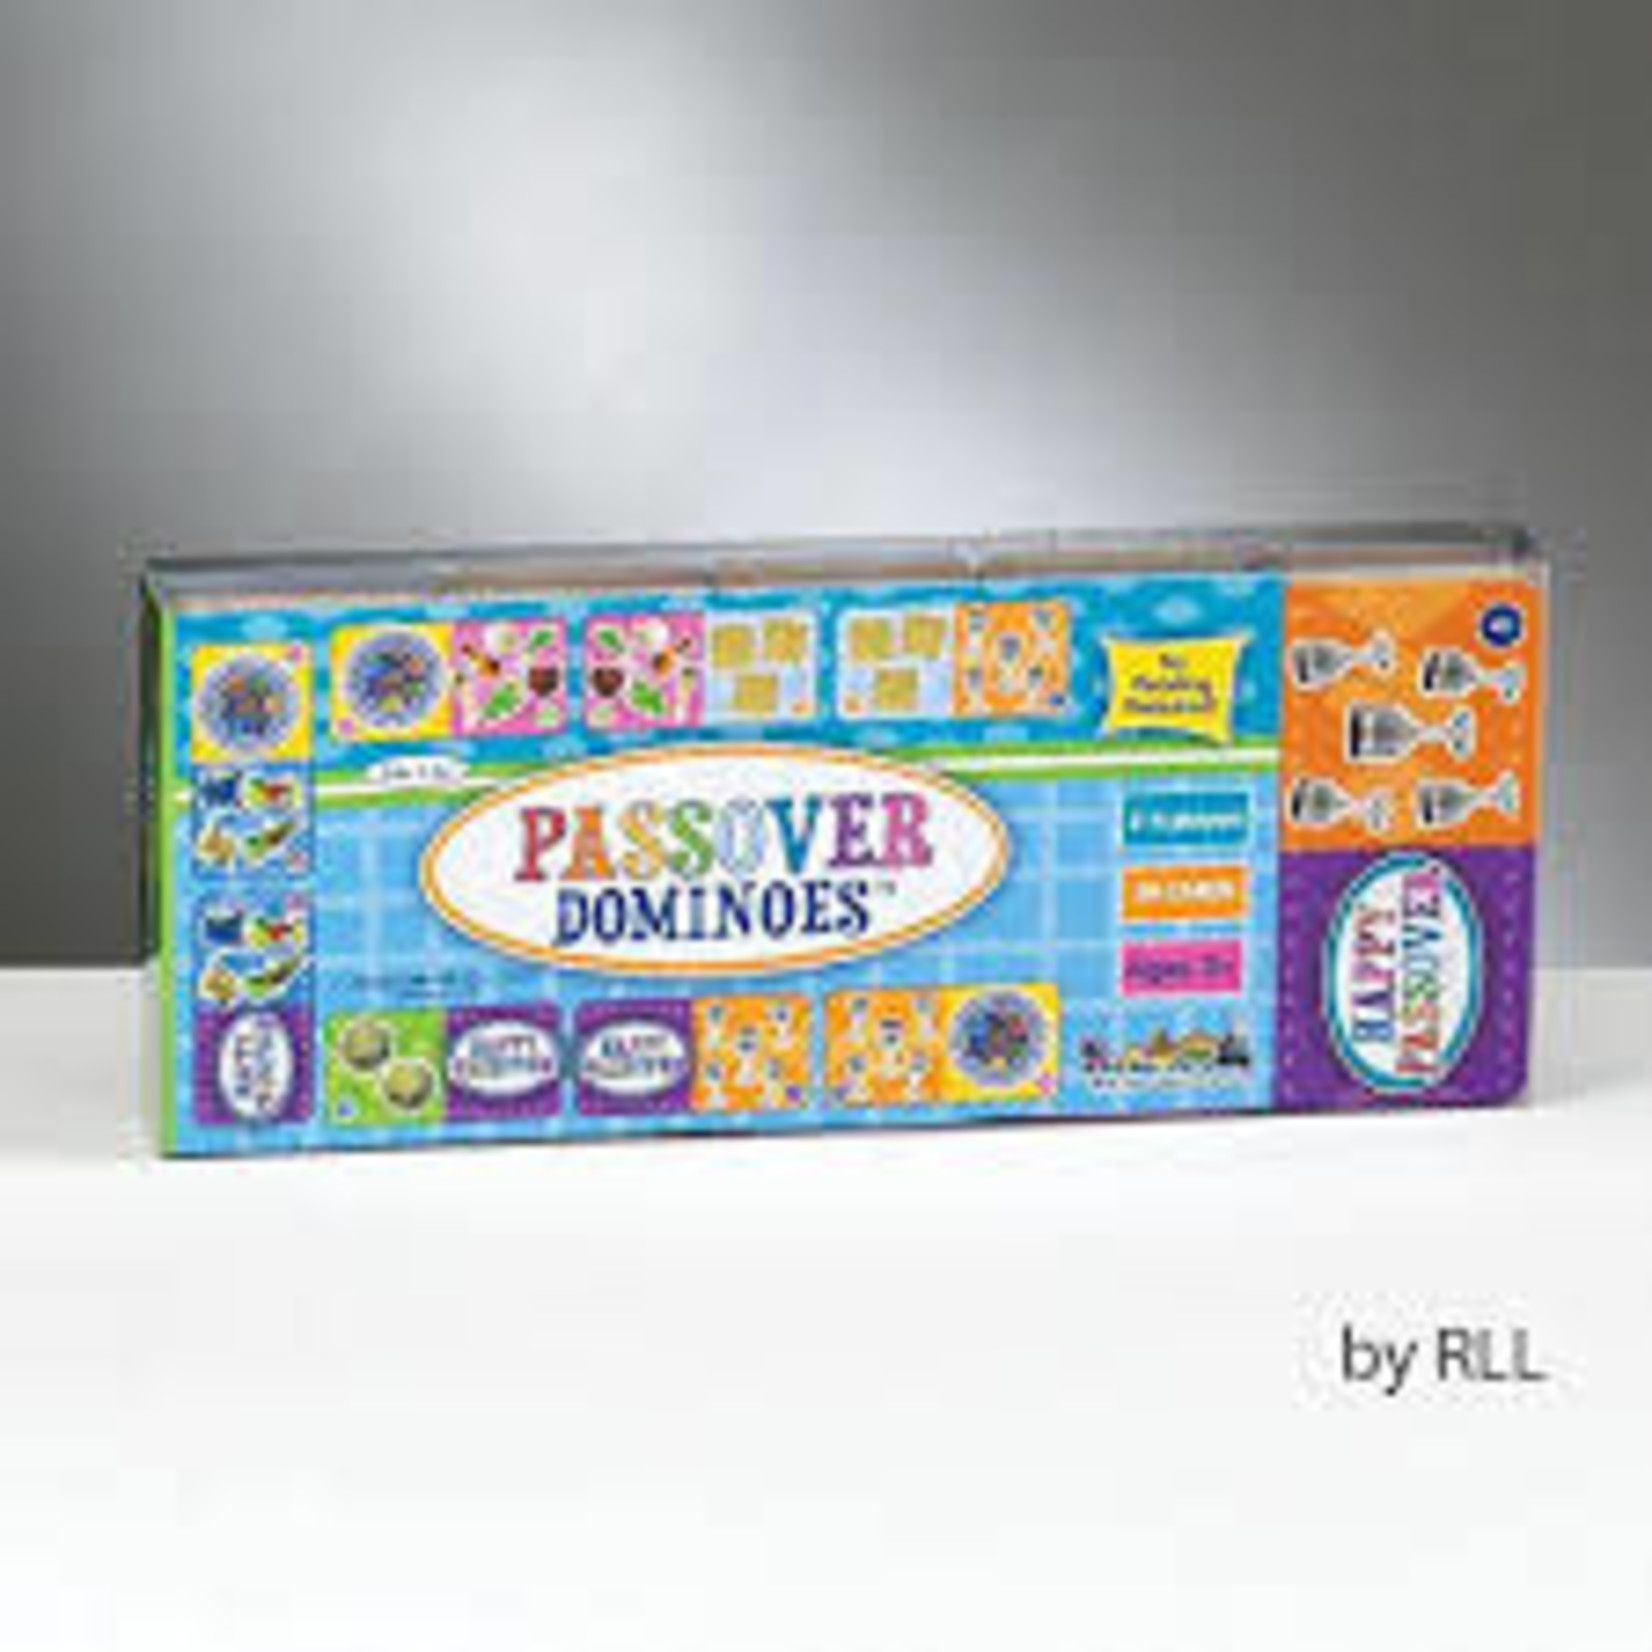 Passover Dominoes Game